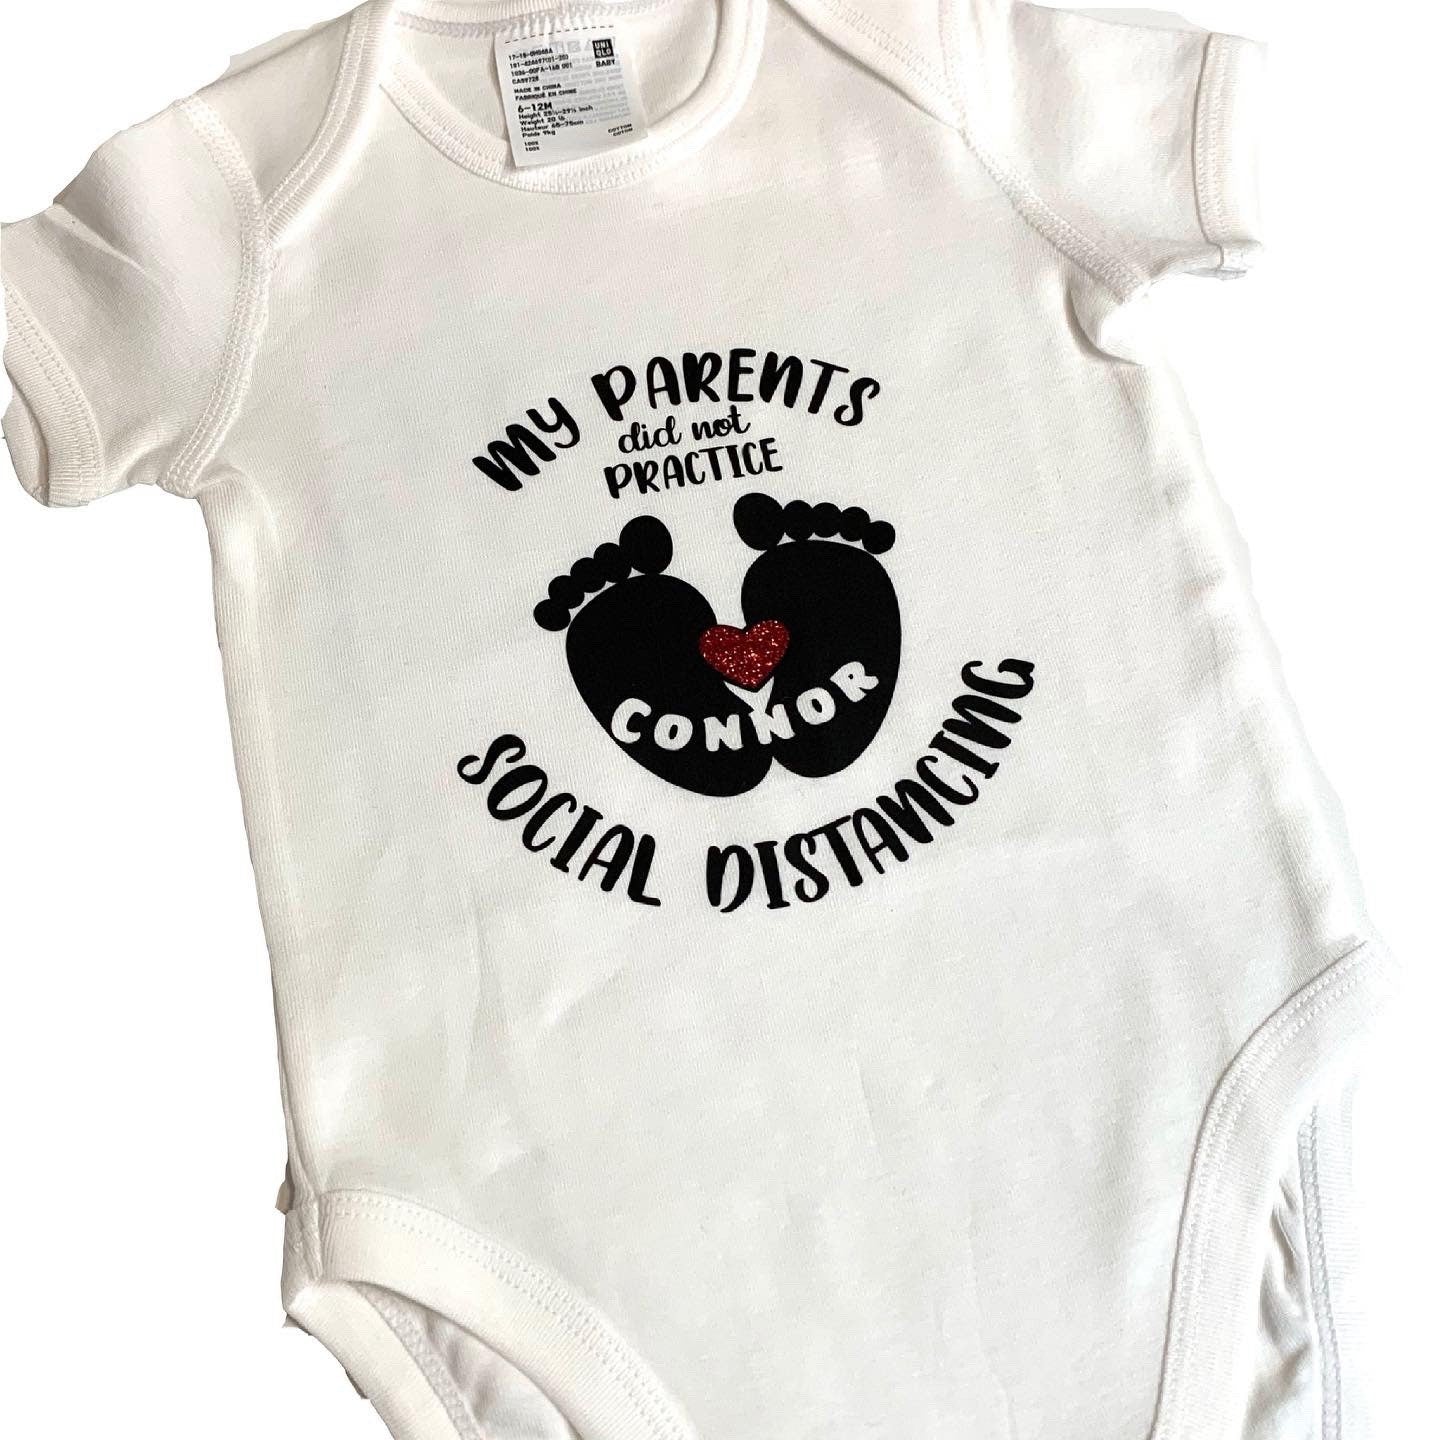 Custom Onesies for Newborn, Pandemic Baby Shower Gift ideas, Personalized Bodysuit Gift for New Parents